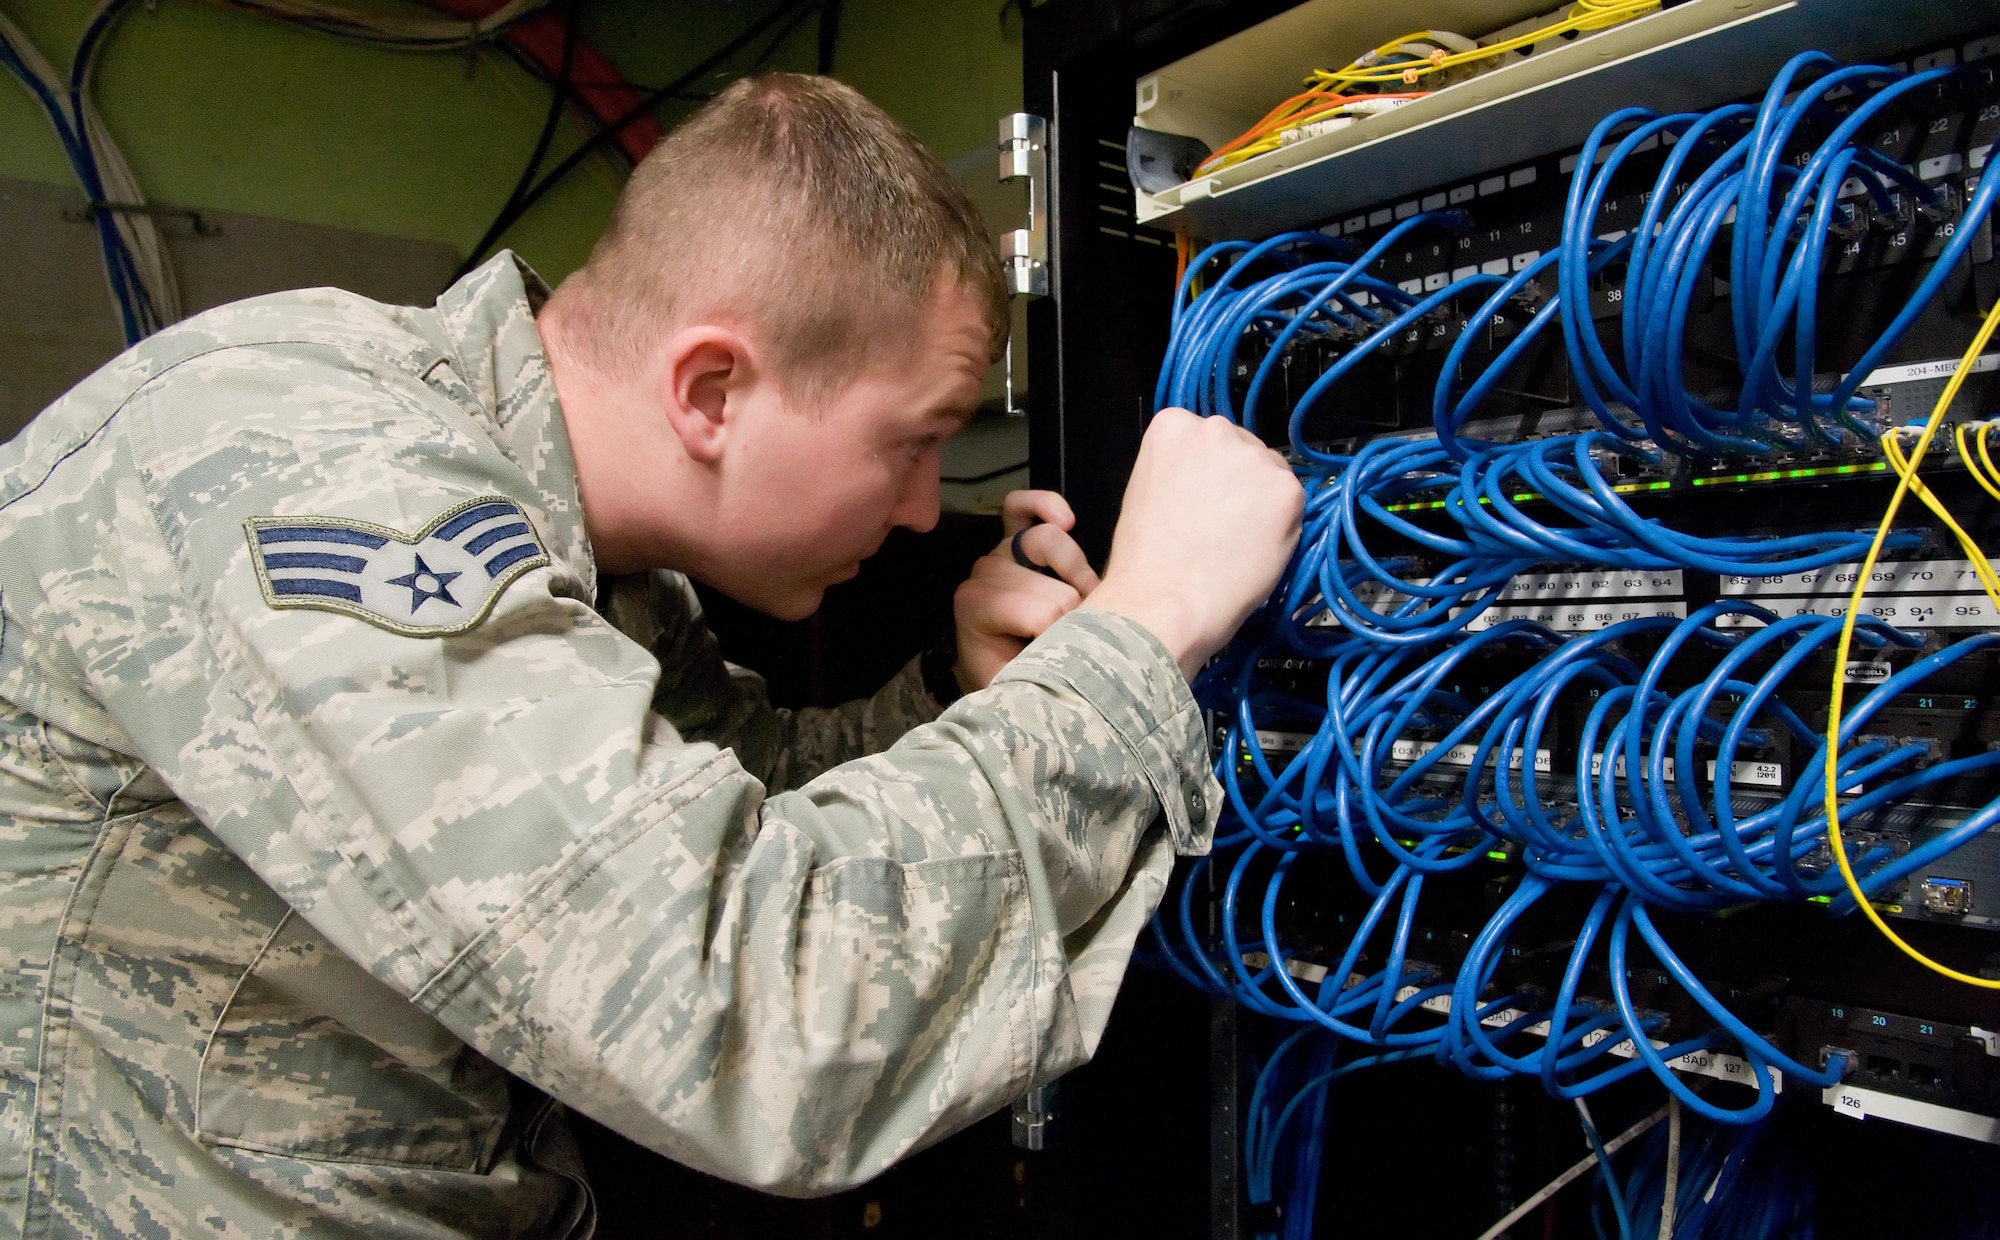 Senior Airman Gene Kellenberger, 436th Communications Squadron cyber operations technician, reconnects Cat 6 cables to a switch Feb. 3, 2017, on Dover Air Force Base, Del. Kellenberger and contractors upgraded network hardware in the second floor communication closet in building 201. (U.S. Air Force photo by Roland Balik)